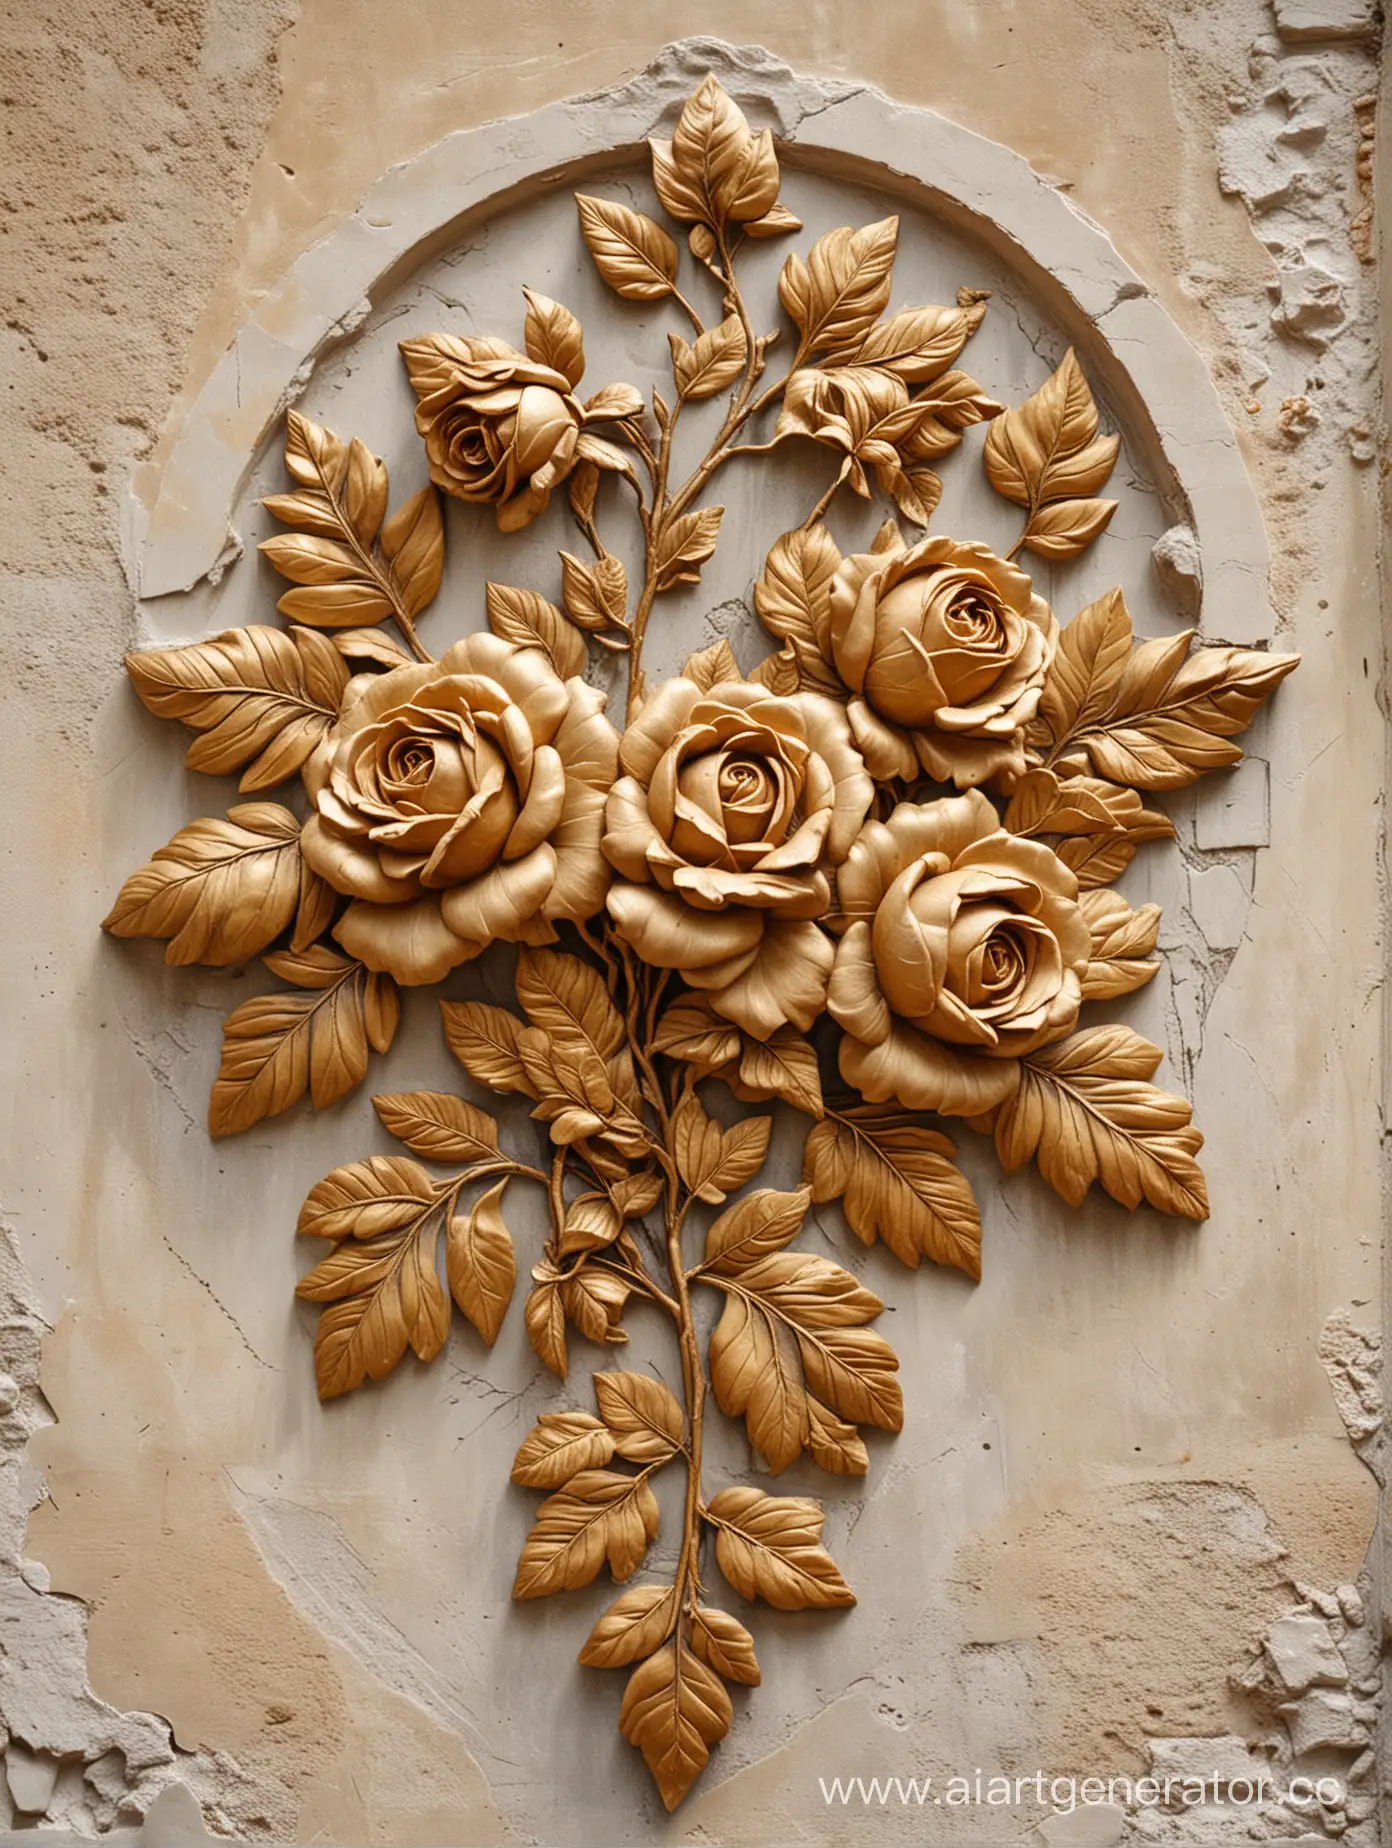 Intricate-BasRelief-Sculpture-of-Oversized-Roses-and-Gilded-Foliage-on-Weathered-Plaster